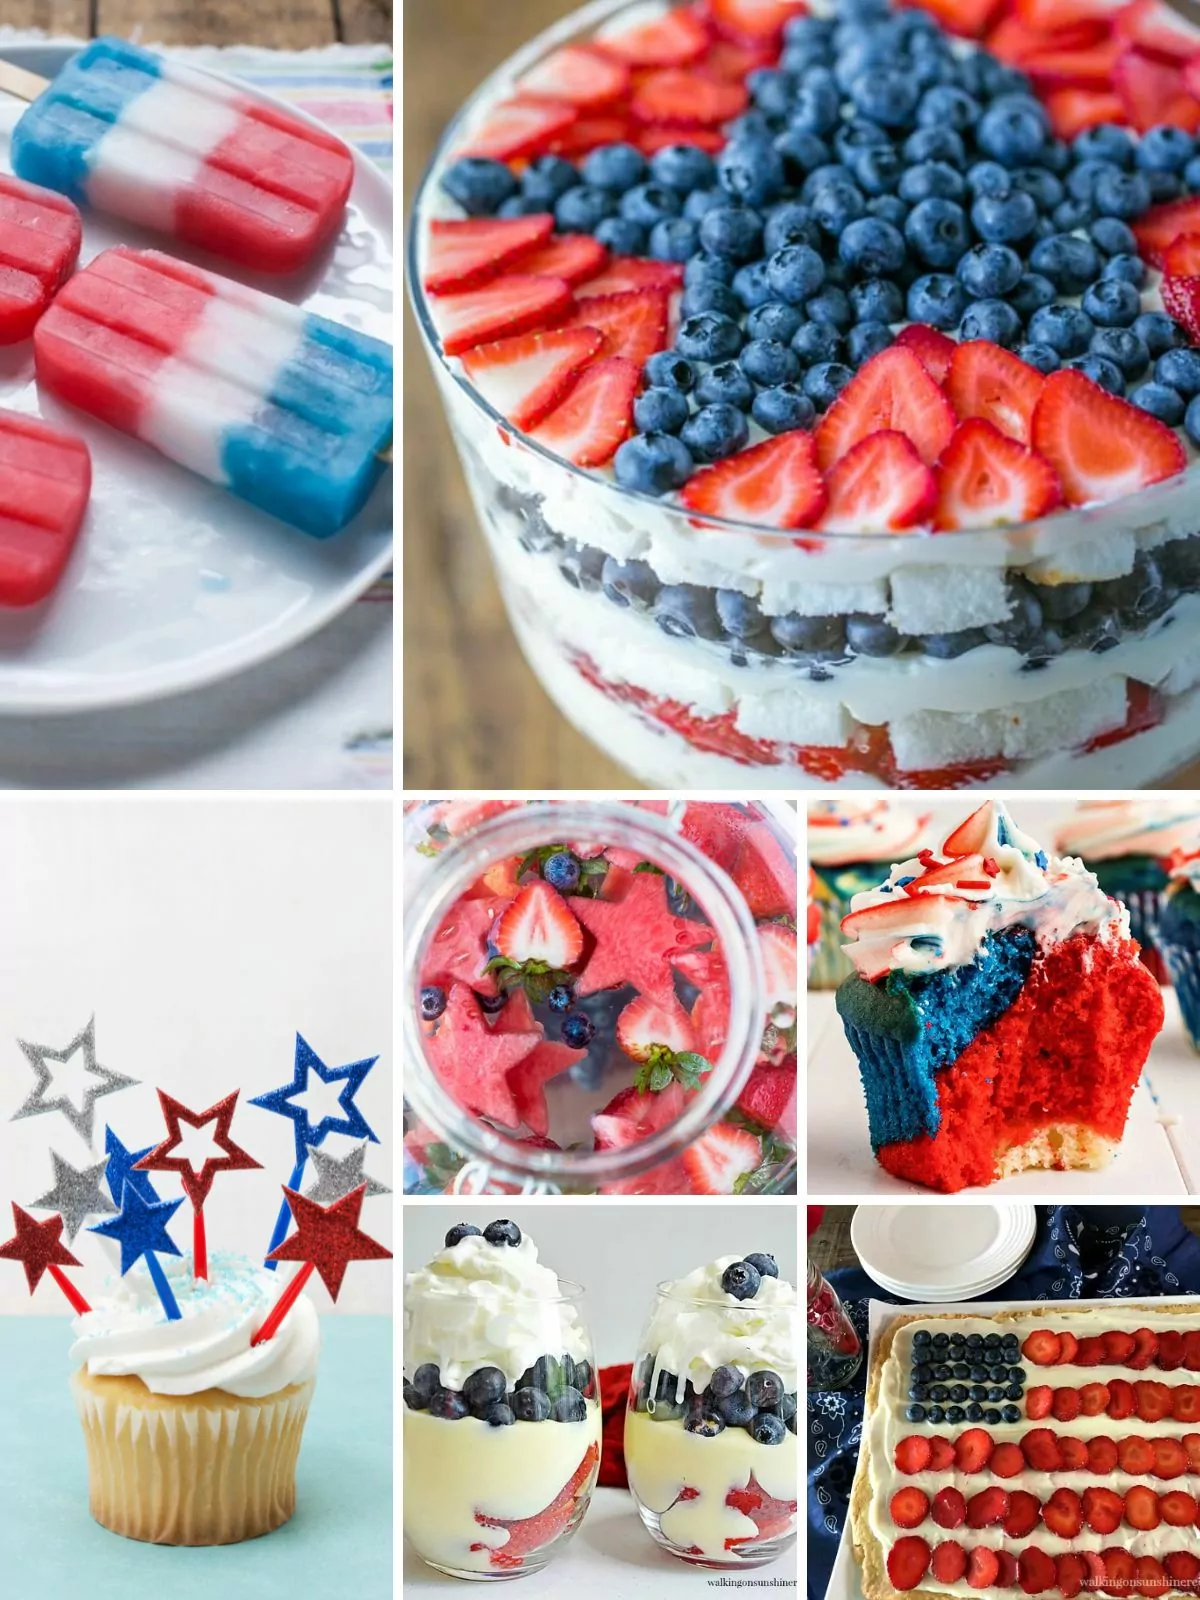 A selection of festive red, white, and blue desserts arranged on a table decorated for the 4th of July, including cupcakes, cookies, and fruit.